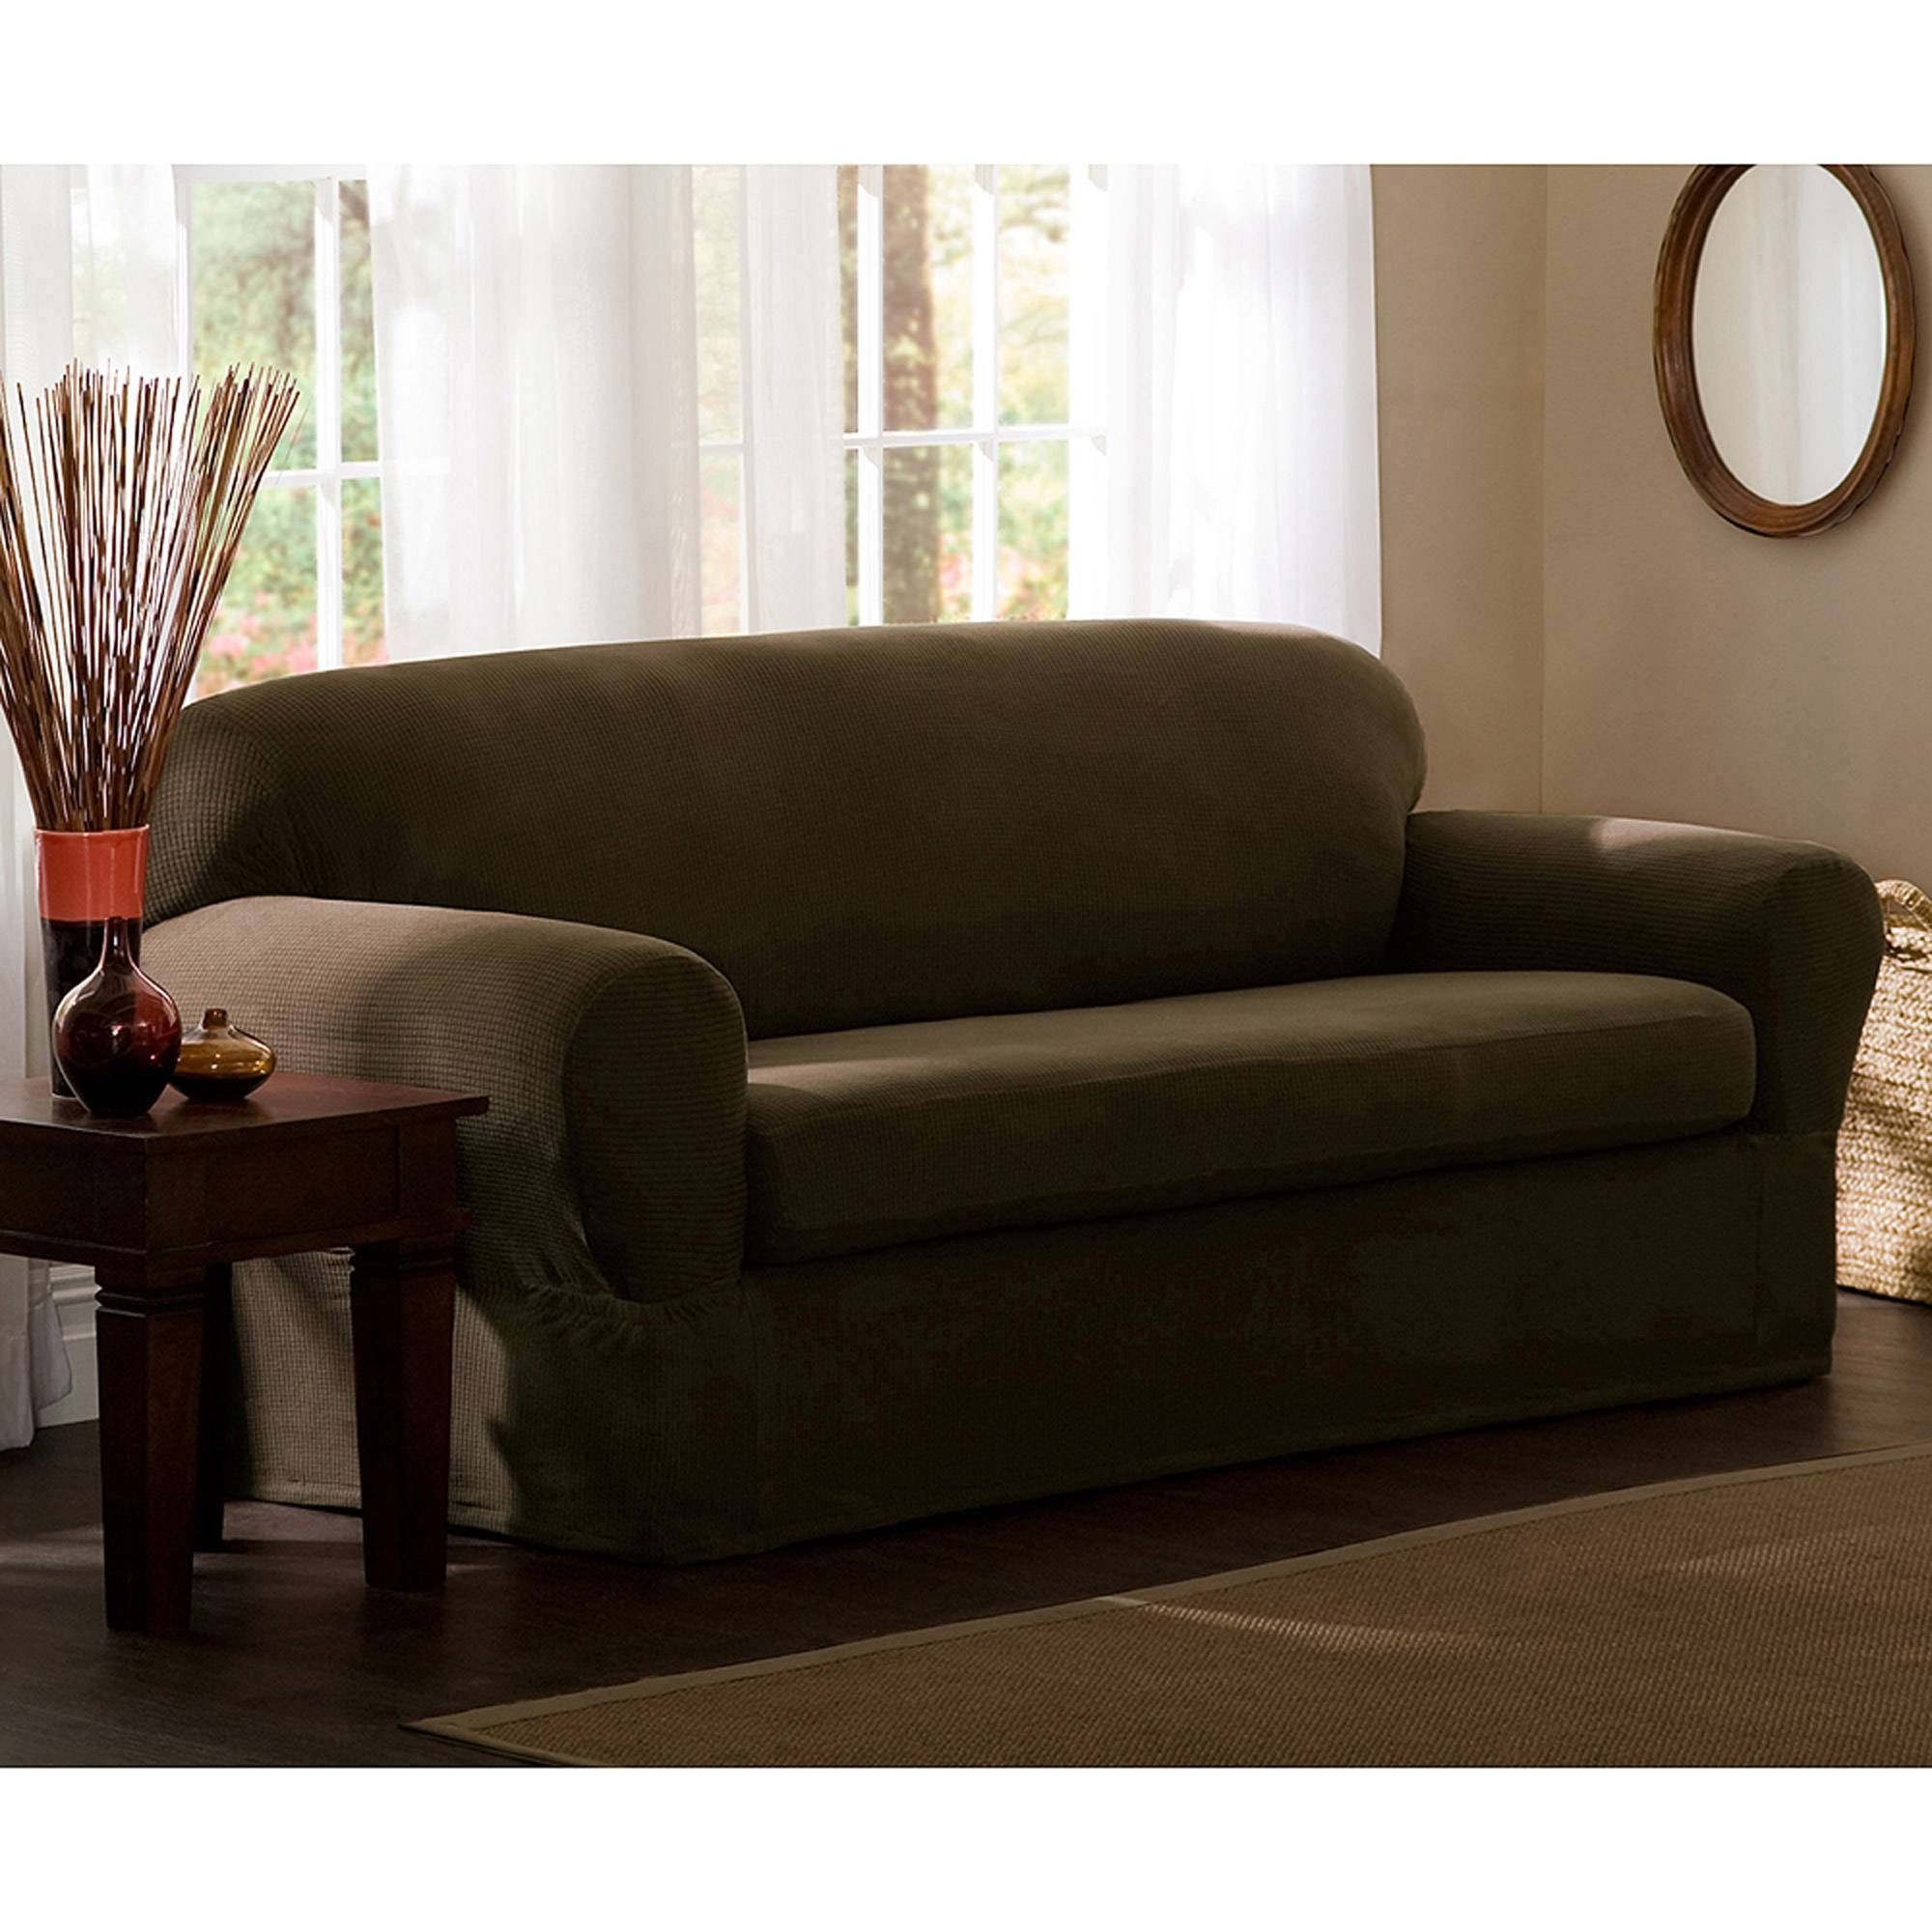 Maytex Reeves Polyester/spandex Loveseat Slipcover – Walmart With Walmart Slipcovers For Sofas (View 14 of 30)